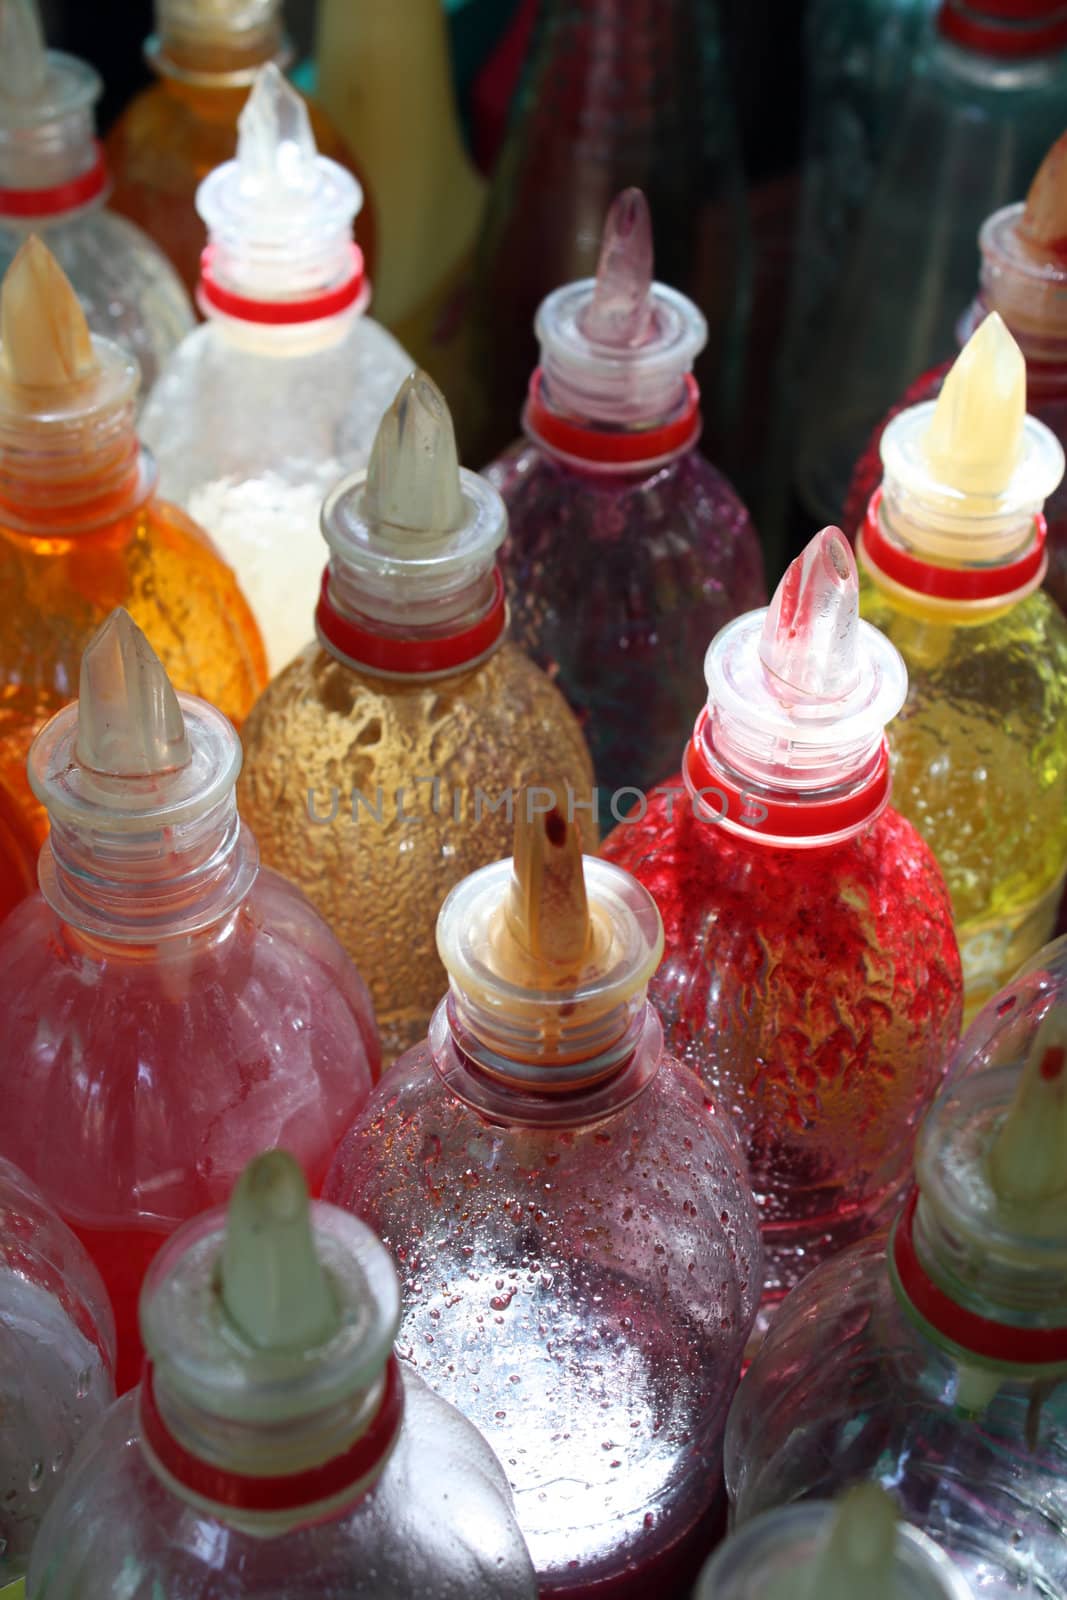 The colorful tester bottles of crush containing various fruity juices.